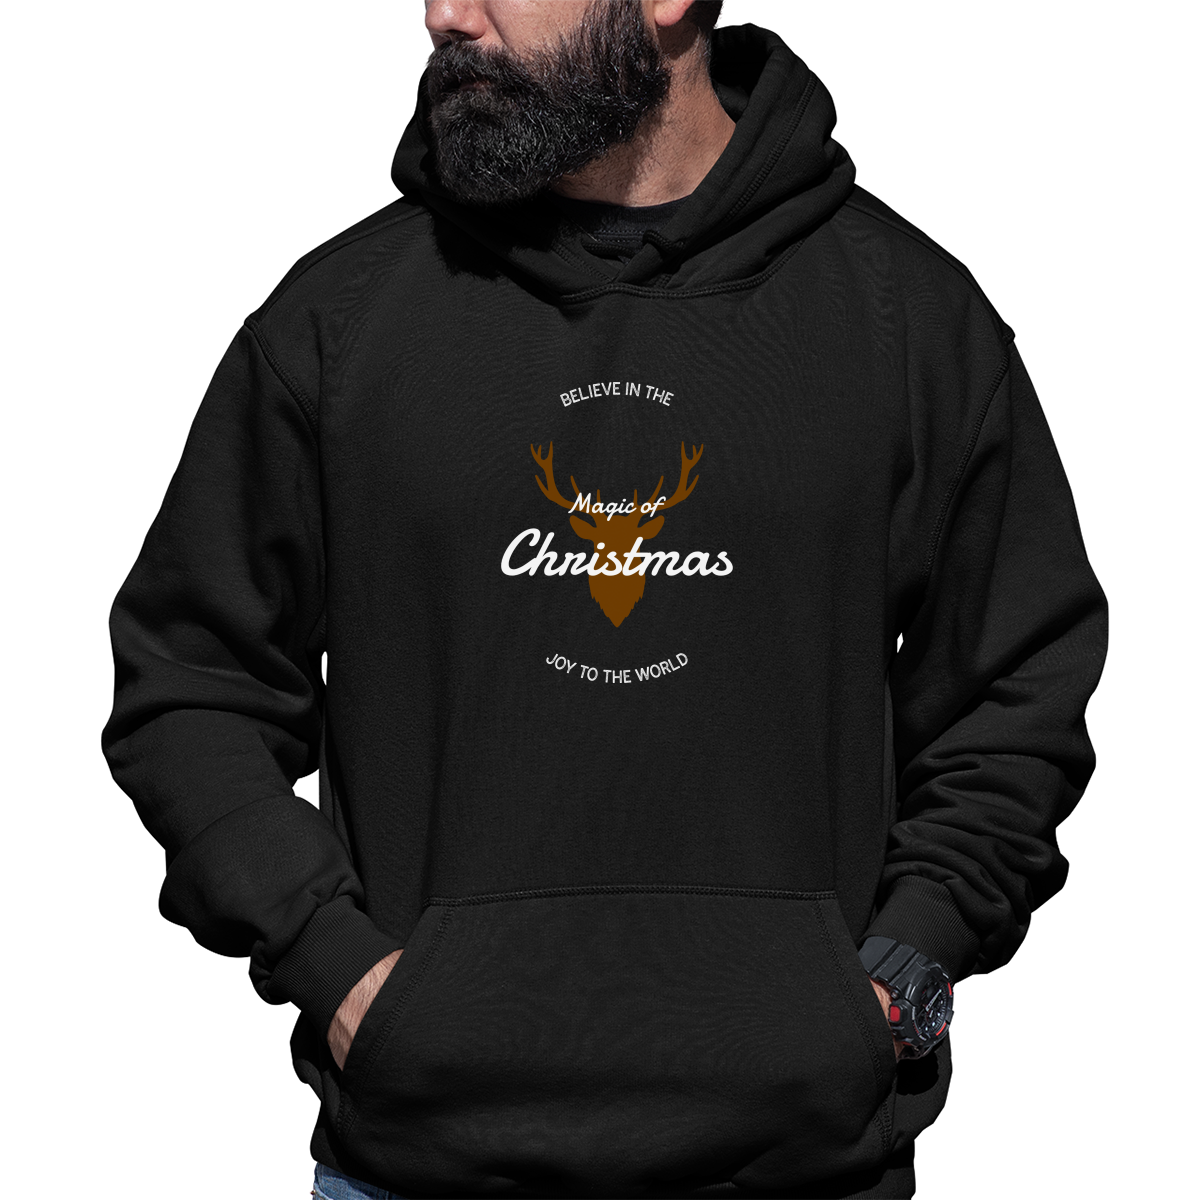 Believe in the Magic of Christmas Joy to the World Unisex Hoodie | Black